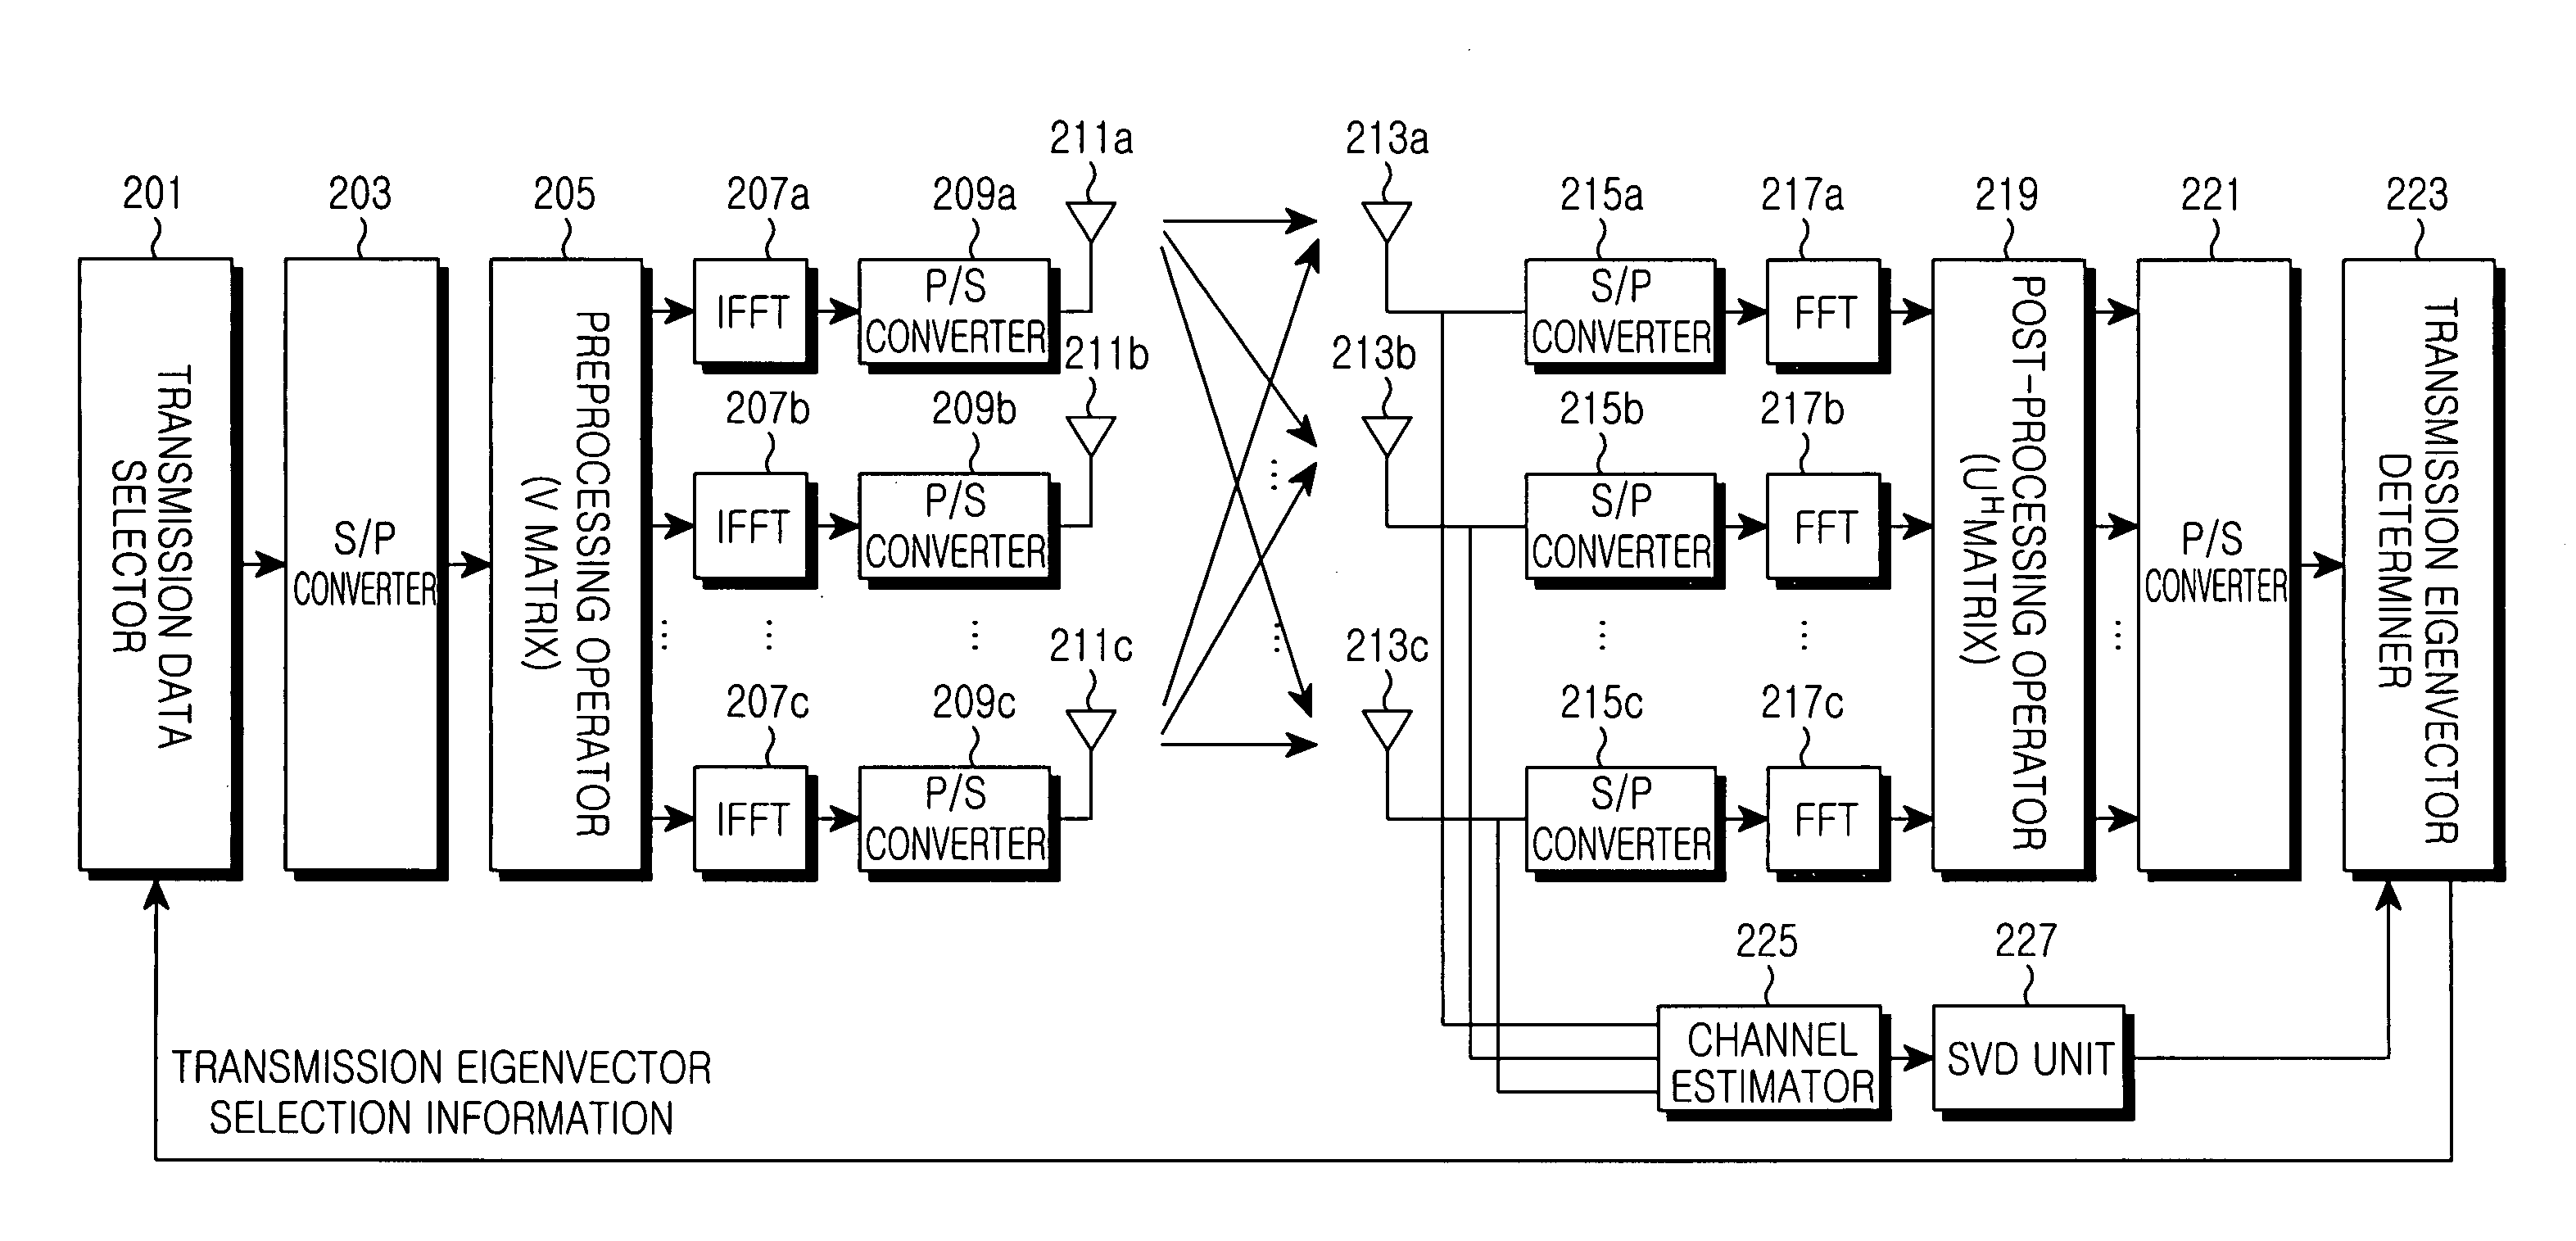 Apparatus and method for transmitting data by selected eigenvector in closed loop MIMO mobile communication system